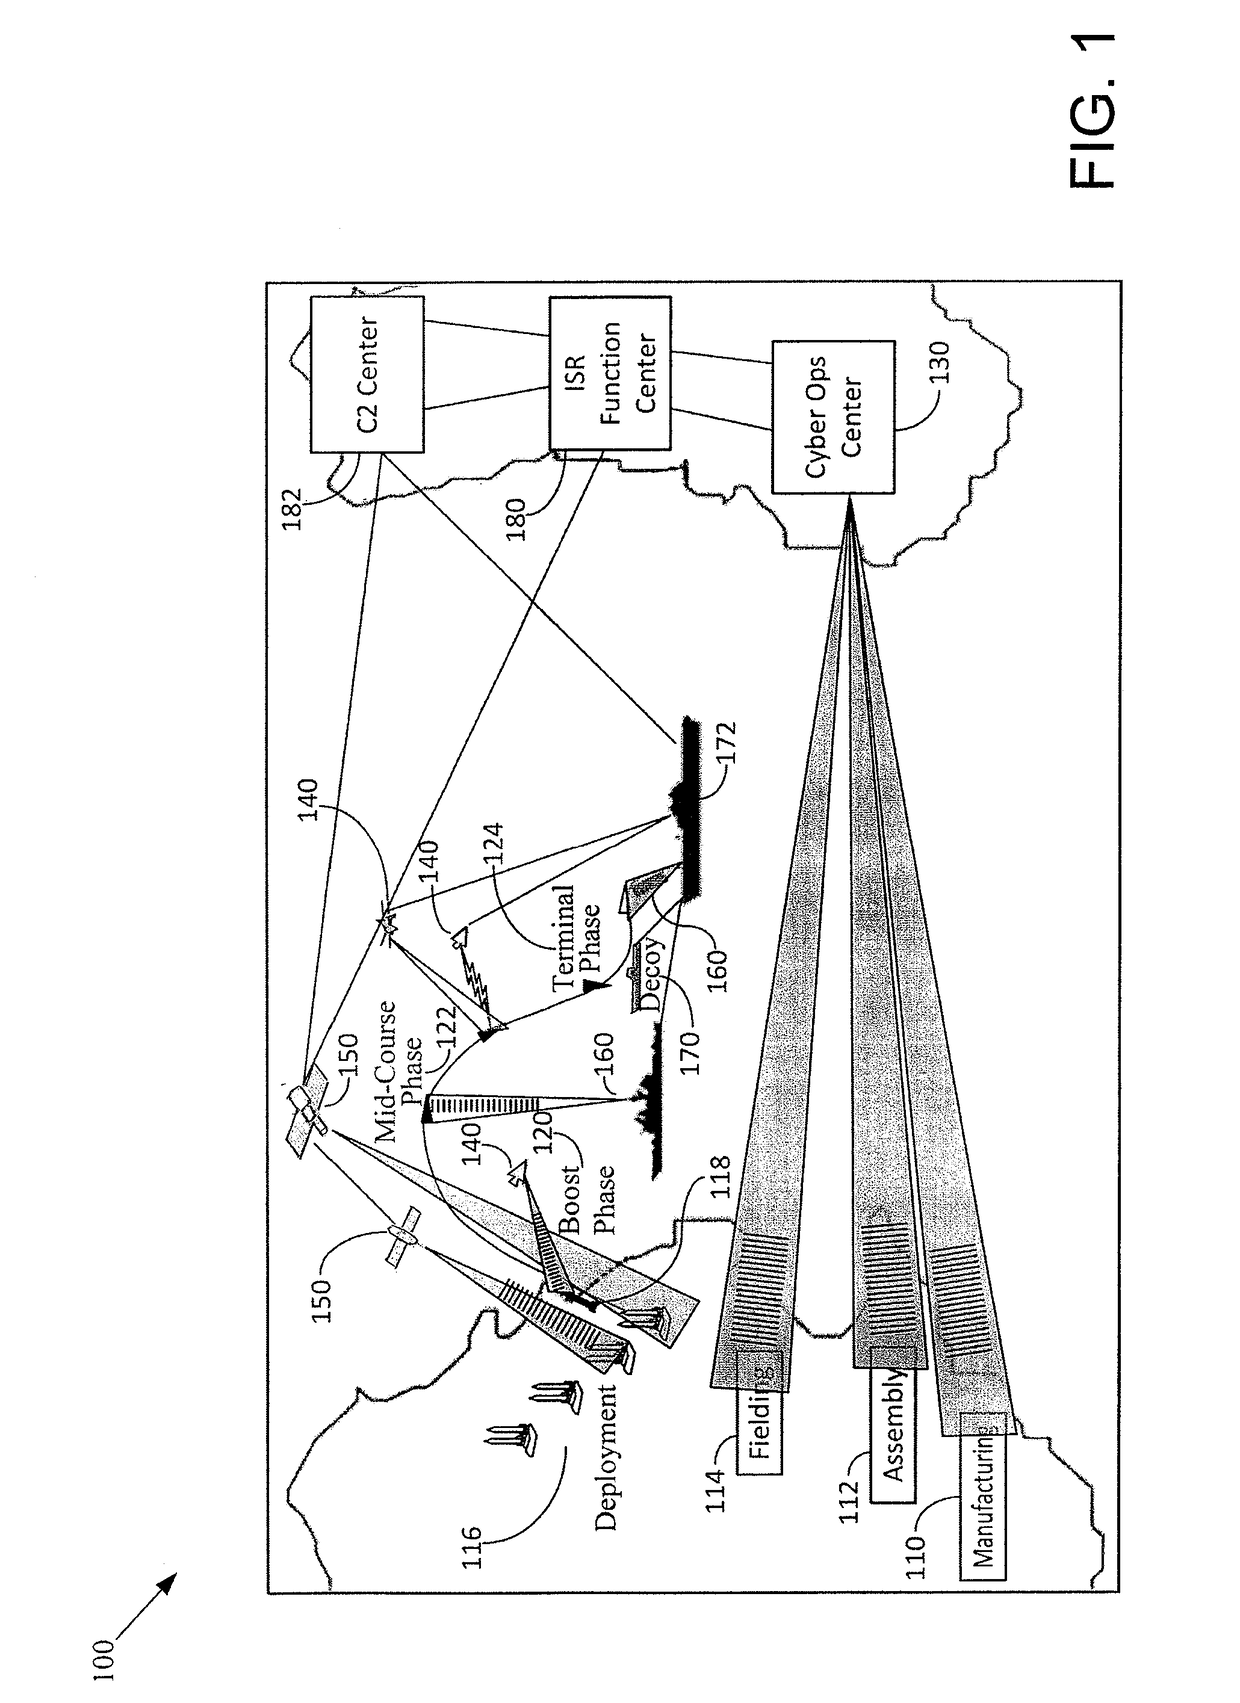 System and method for asymmetric missile defense